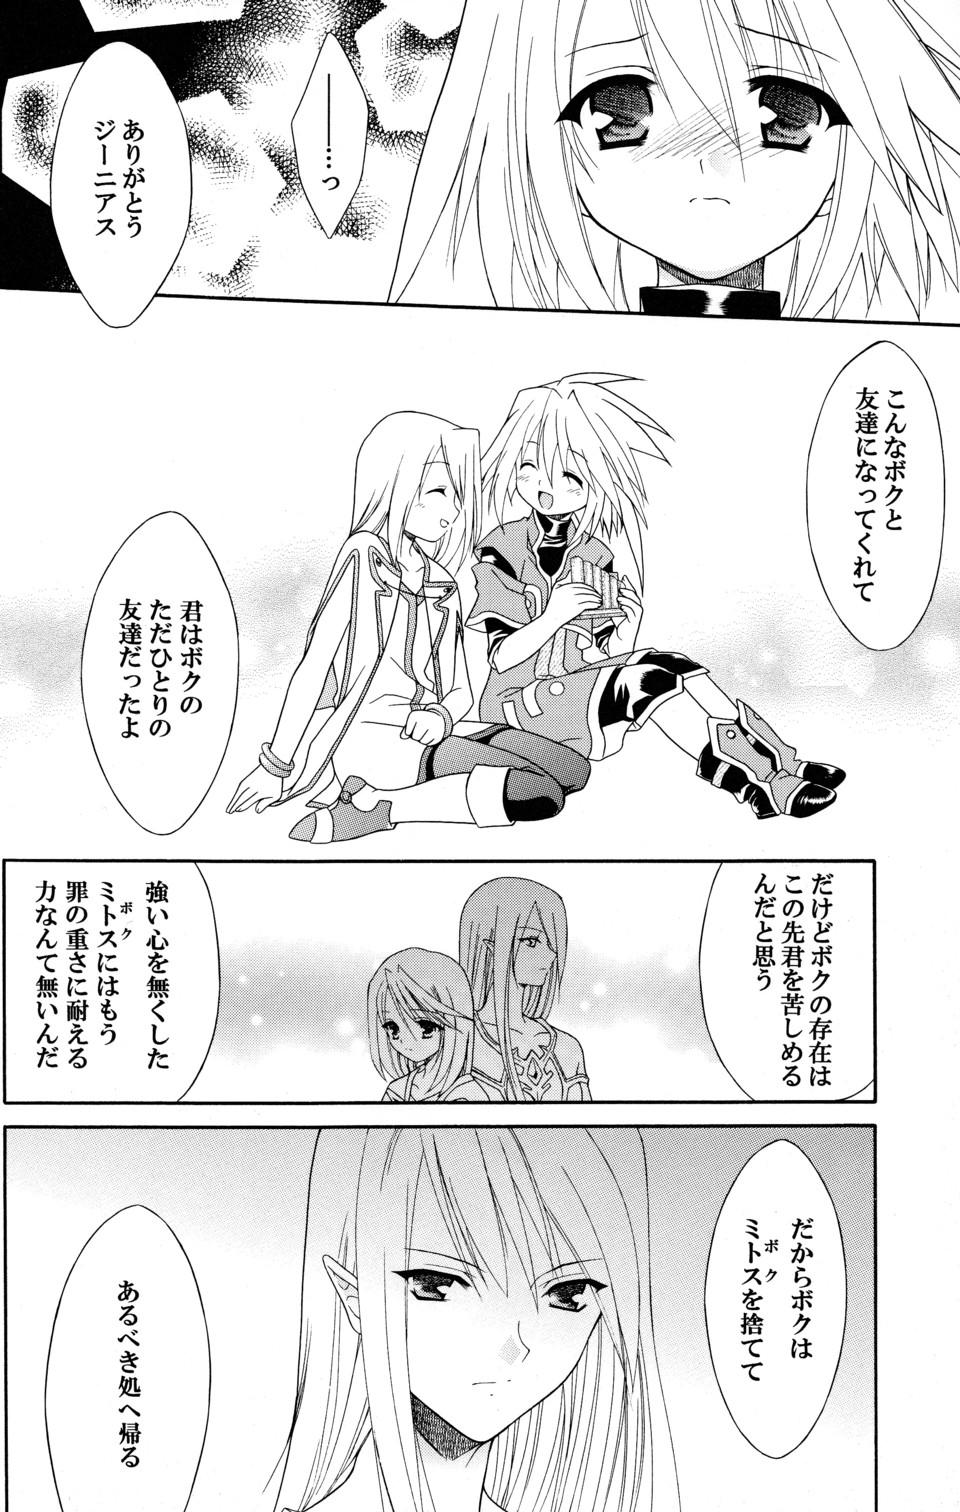 Perfect Butt Last Message - Tales of symphonia Chastity - Page 18